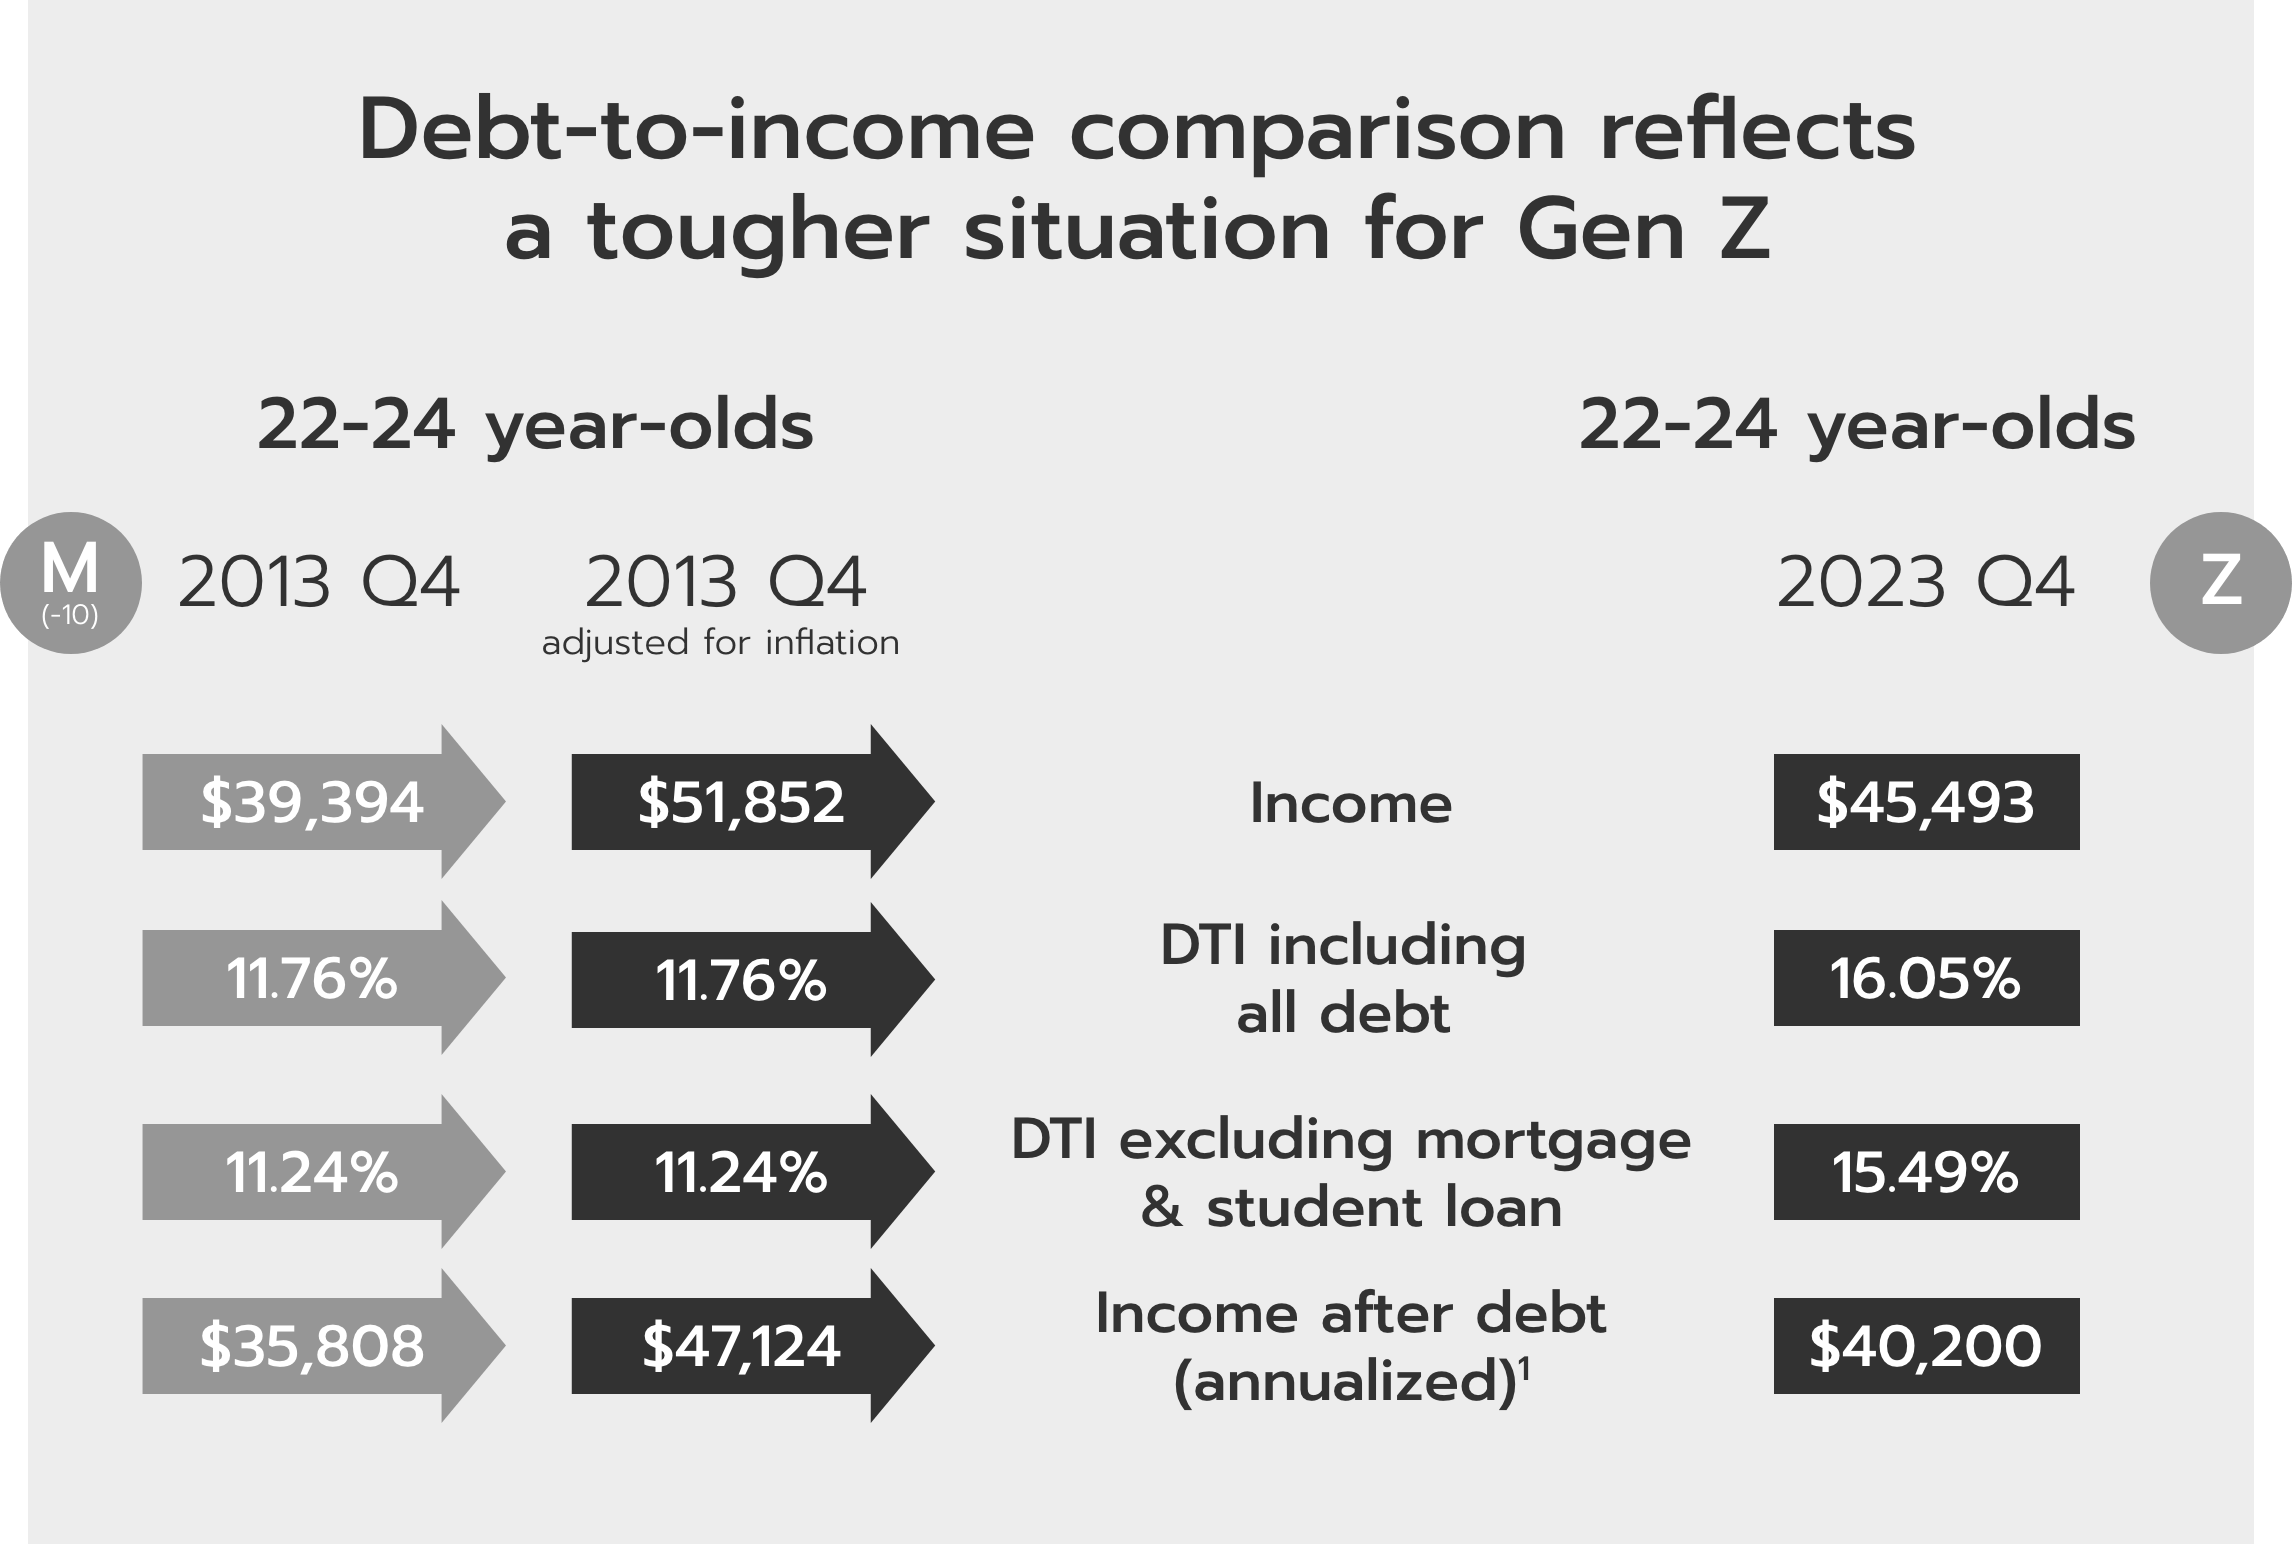 Debt-to-income comparison reflects a tougher situation for Gen Z